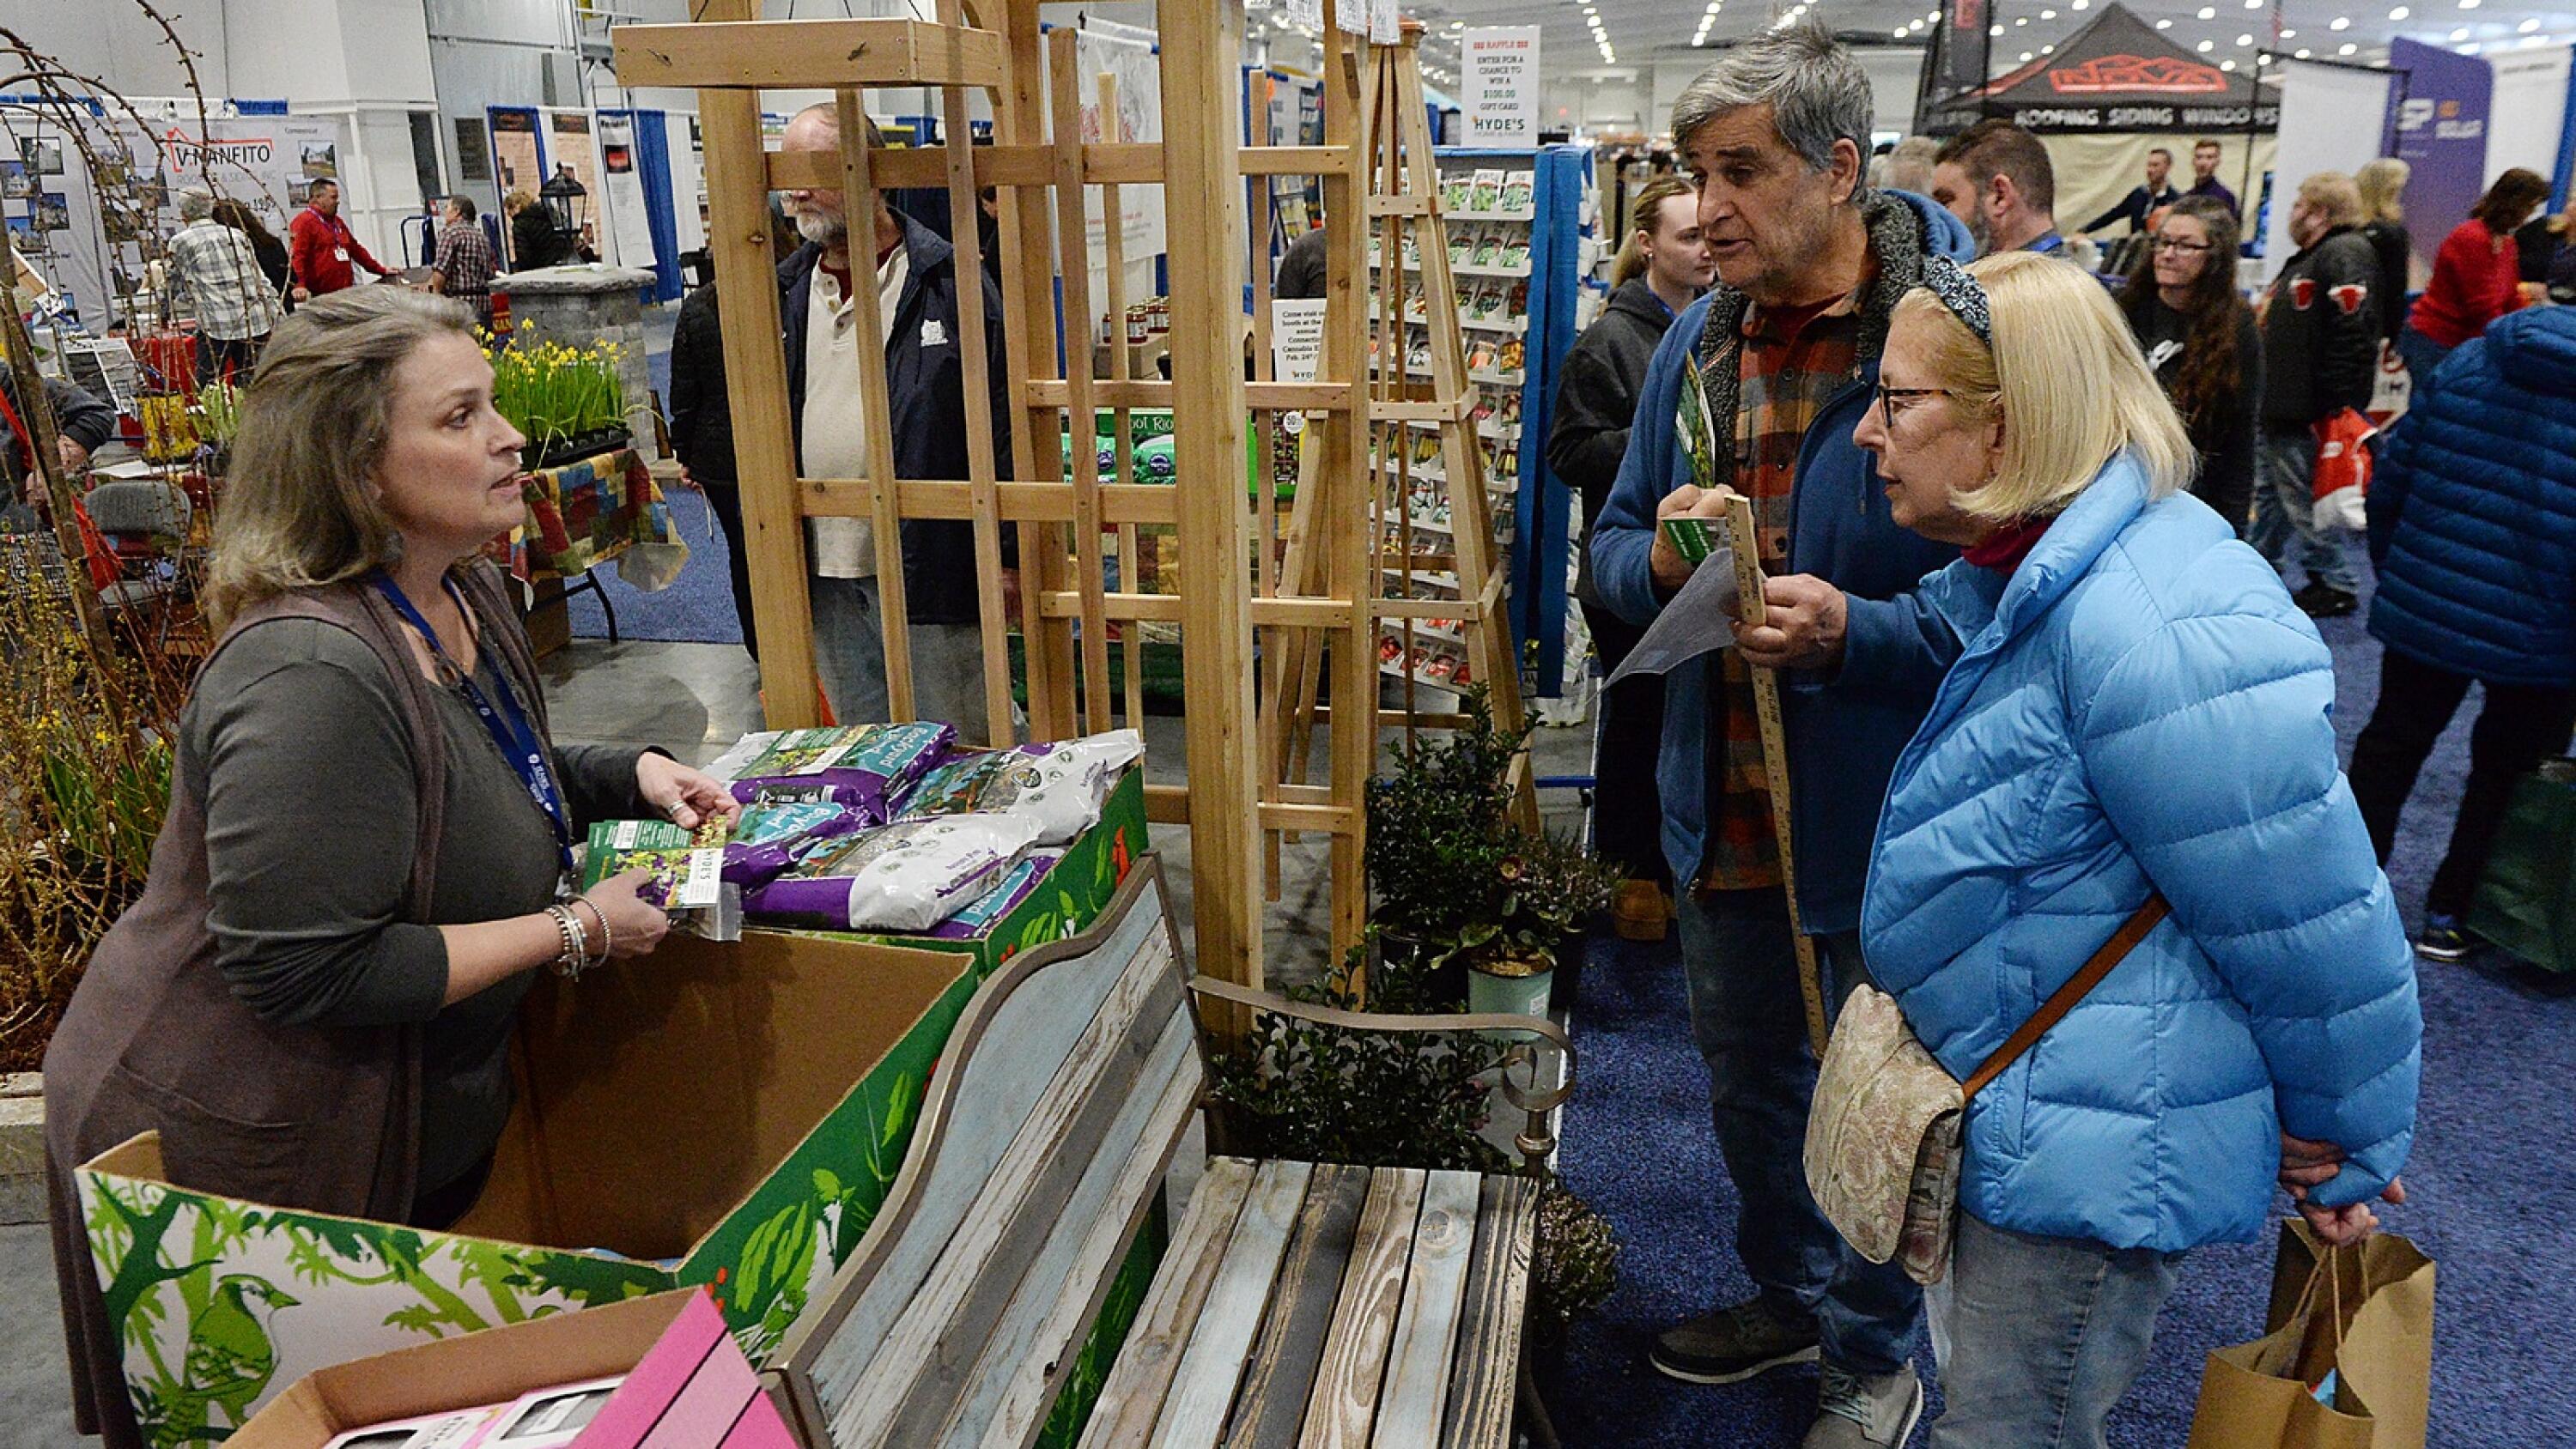 Home and garden show provides eclectic mix of wares